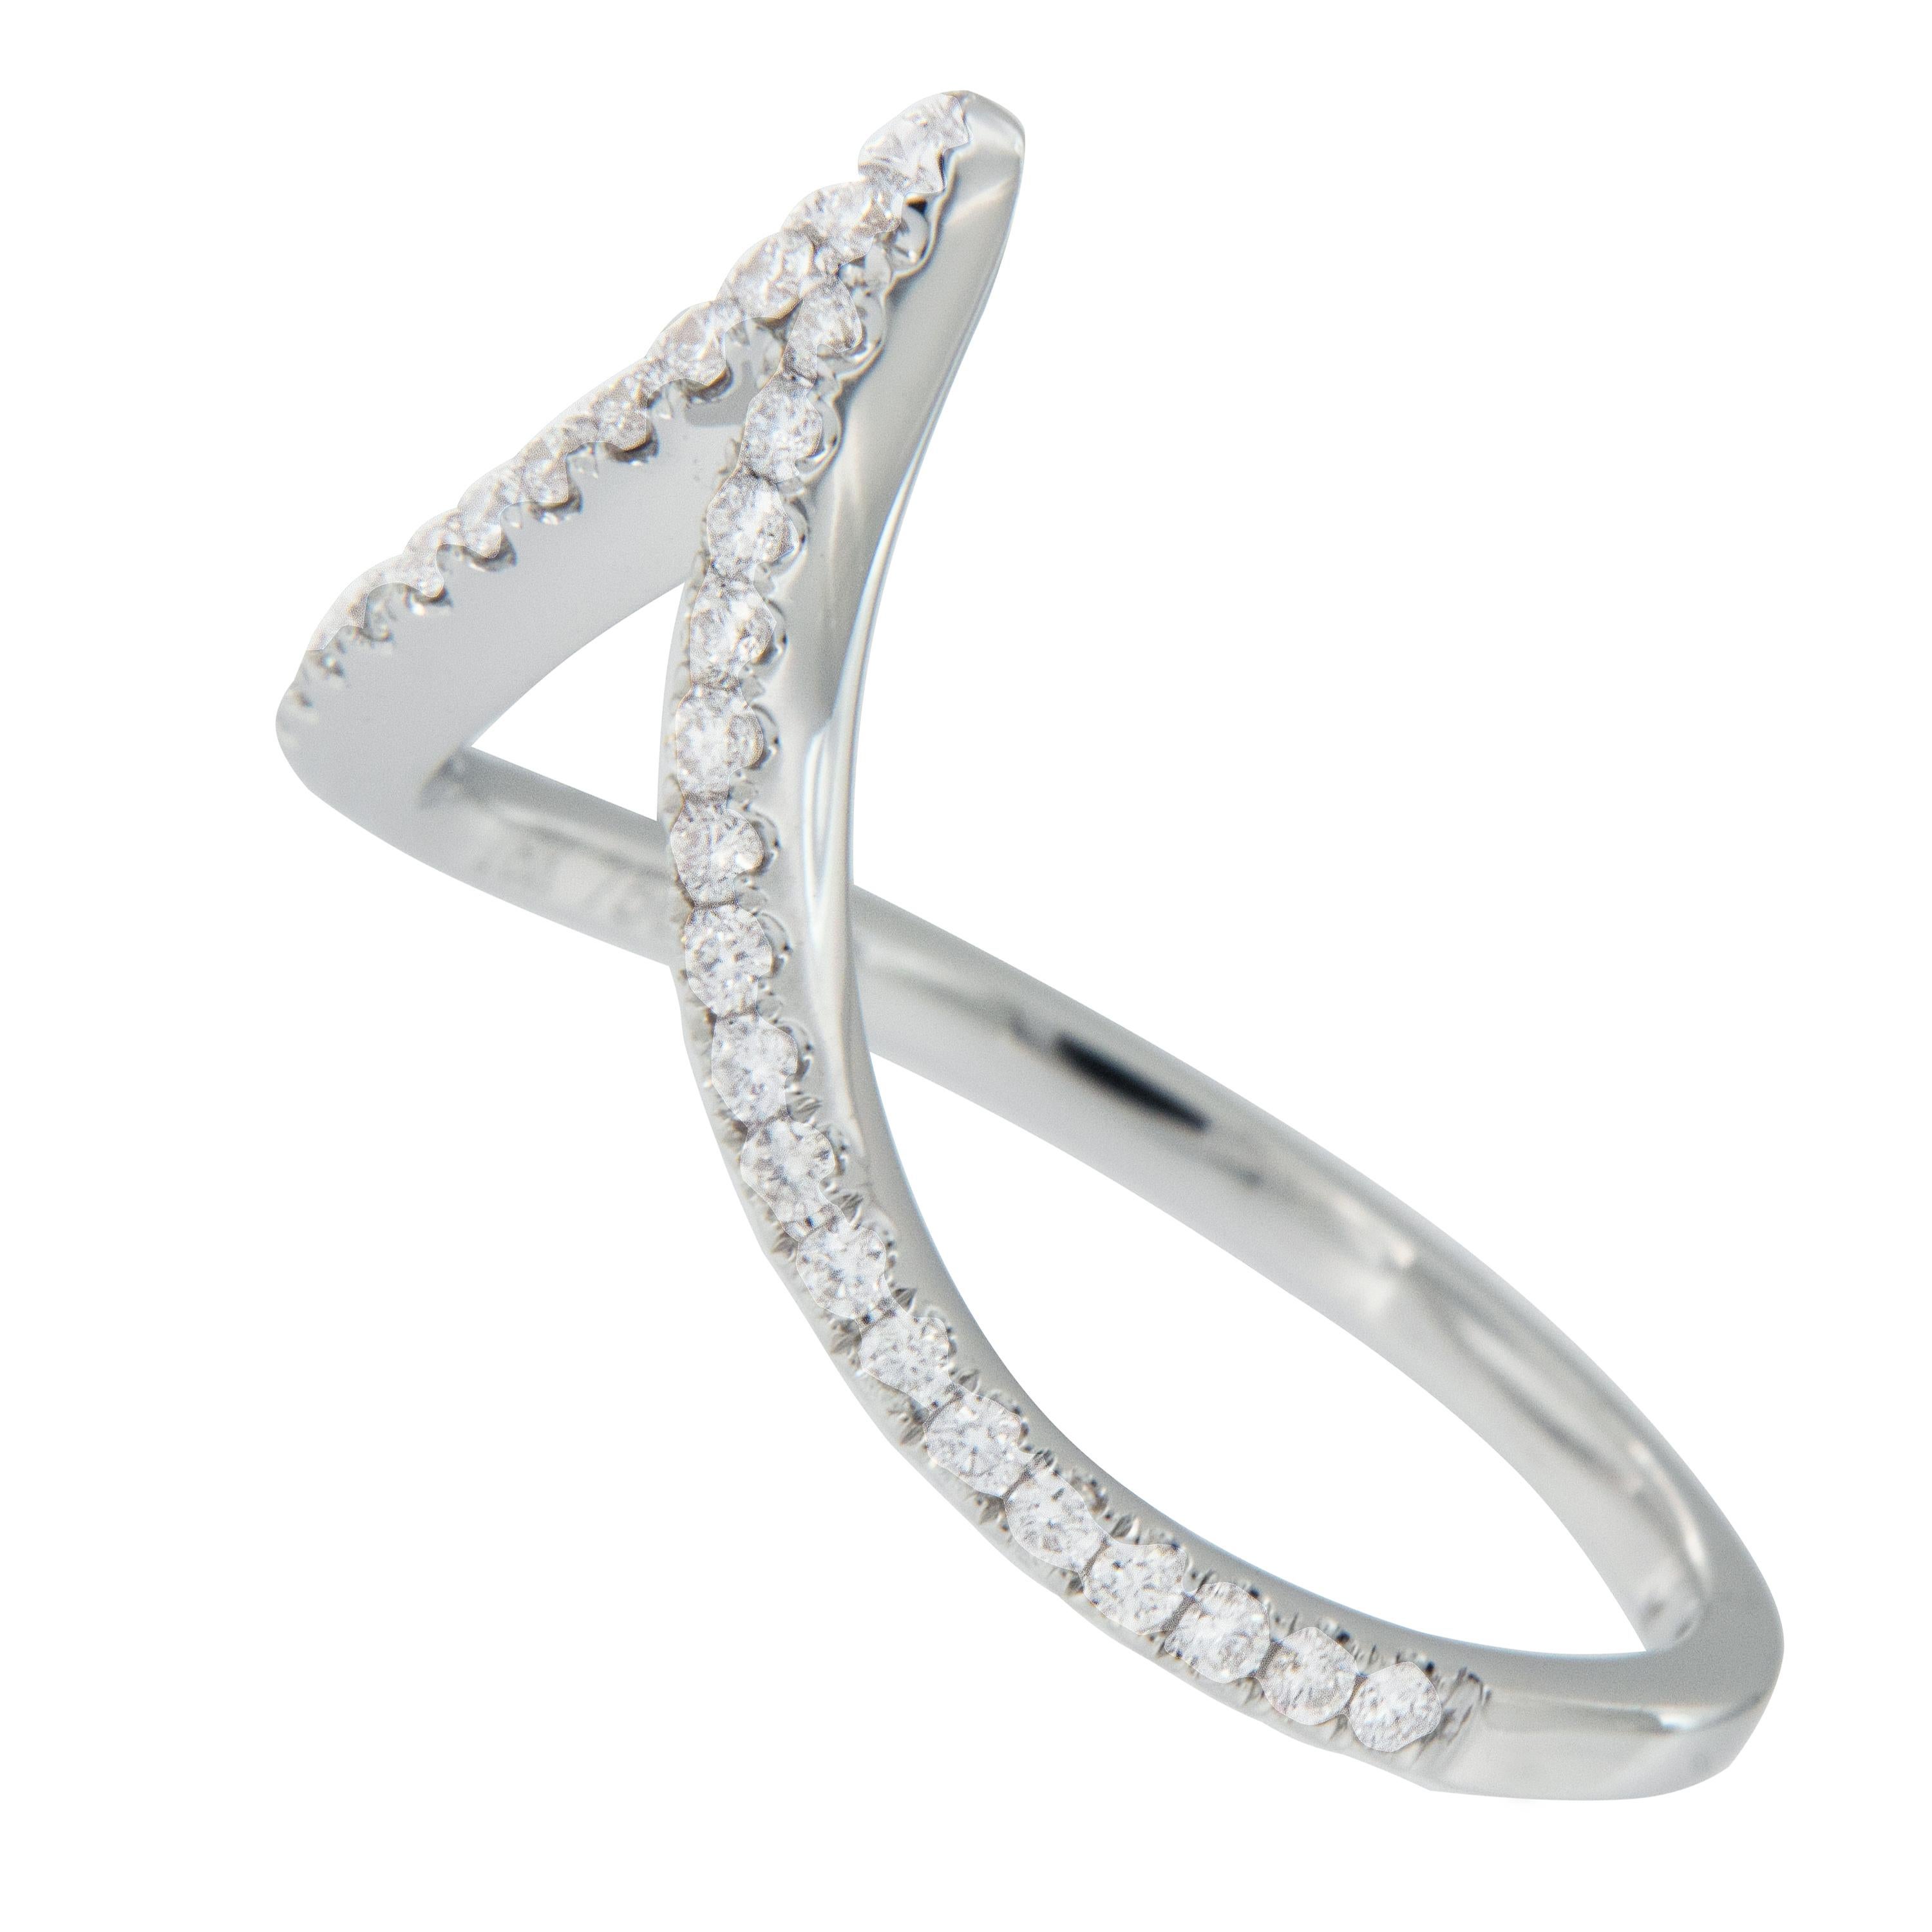 This elegant & brand new V shaped diamond ring not only looks fabulous alone or stacked but it also nests up perfectly with Oval, Pear Shape, Marquise Shaped & halo engagement rings! Crafted in fine 18 karat white gold & precision set with 35 round